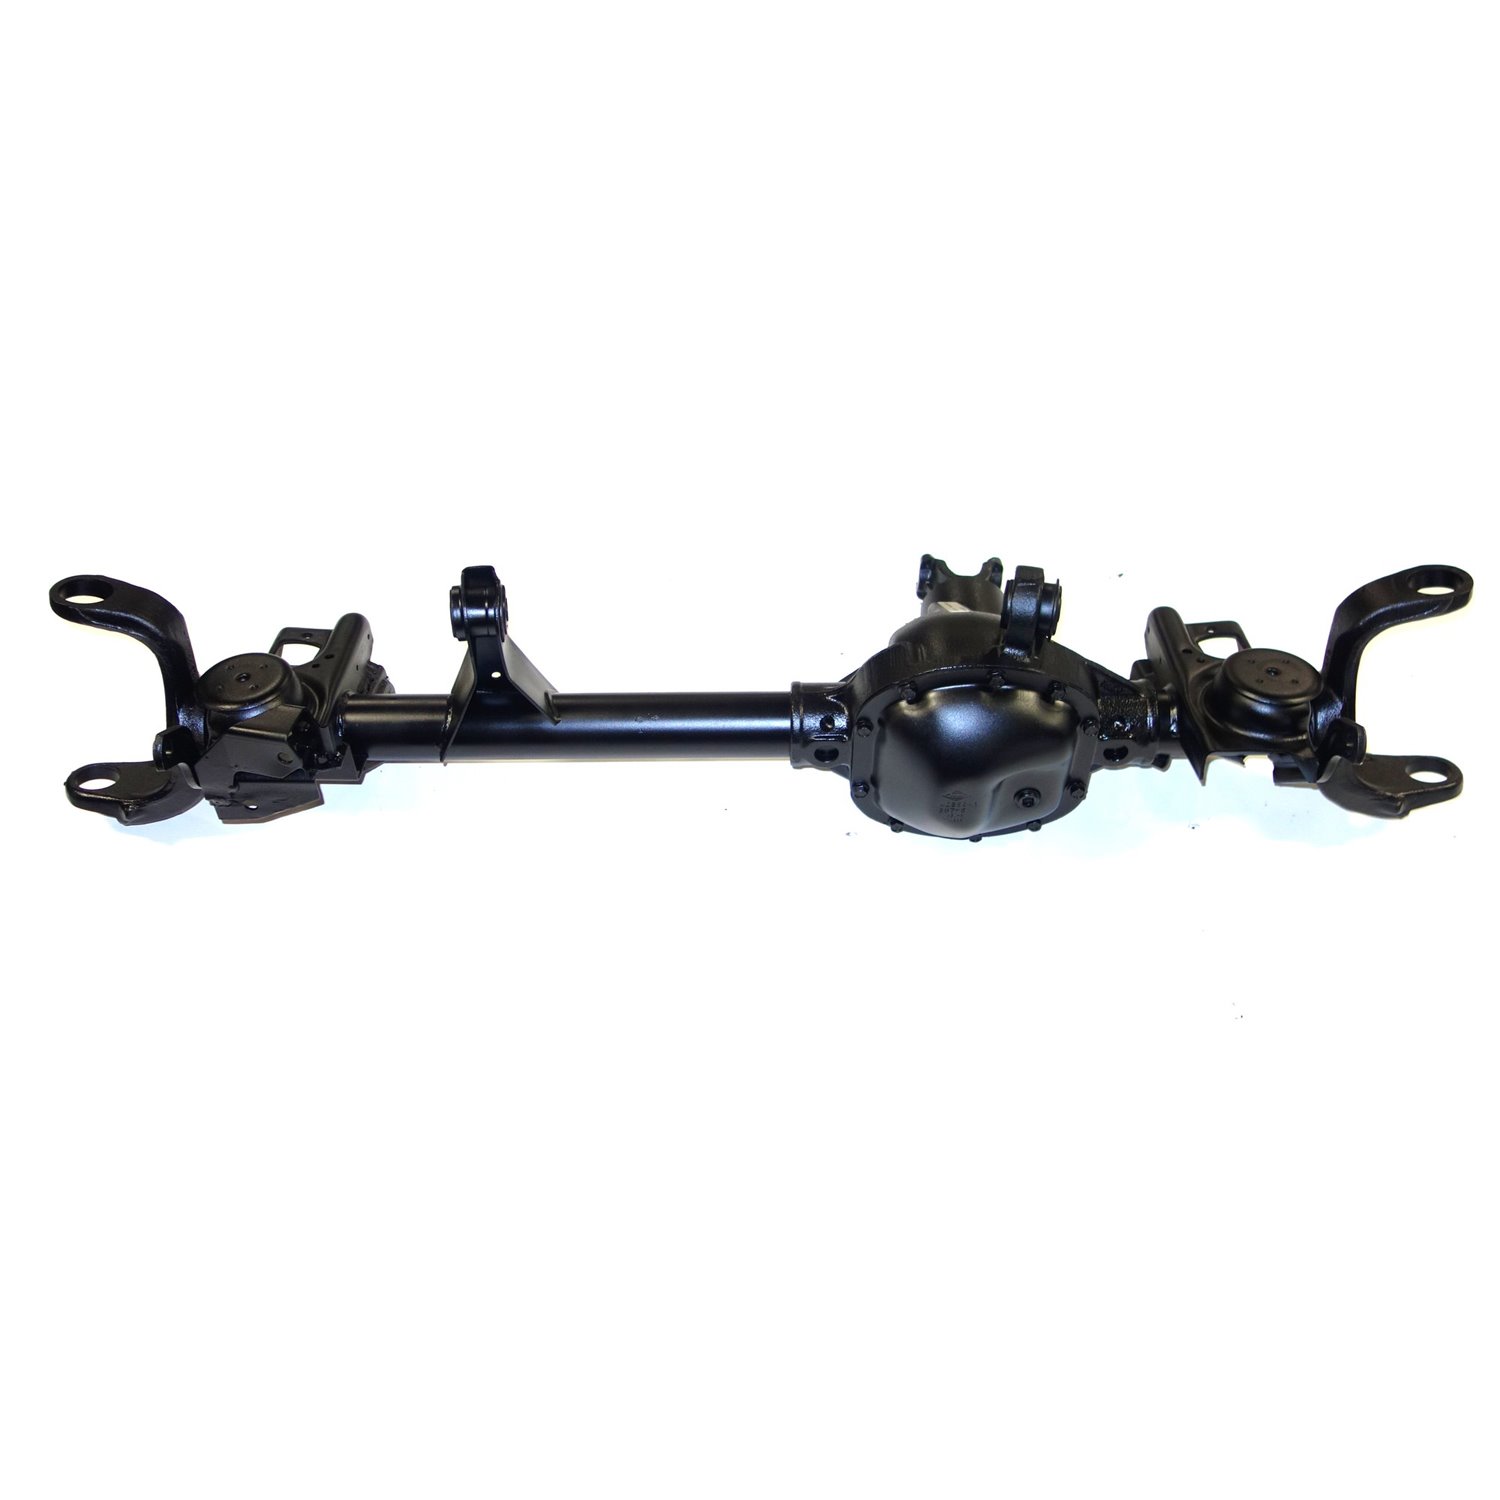 Remanufactured Complete Axle Assy for Dana 30 1998 Grand Cherokee 3.73 with 242 T-Case